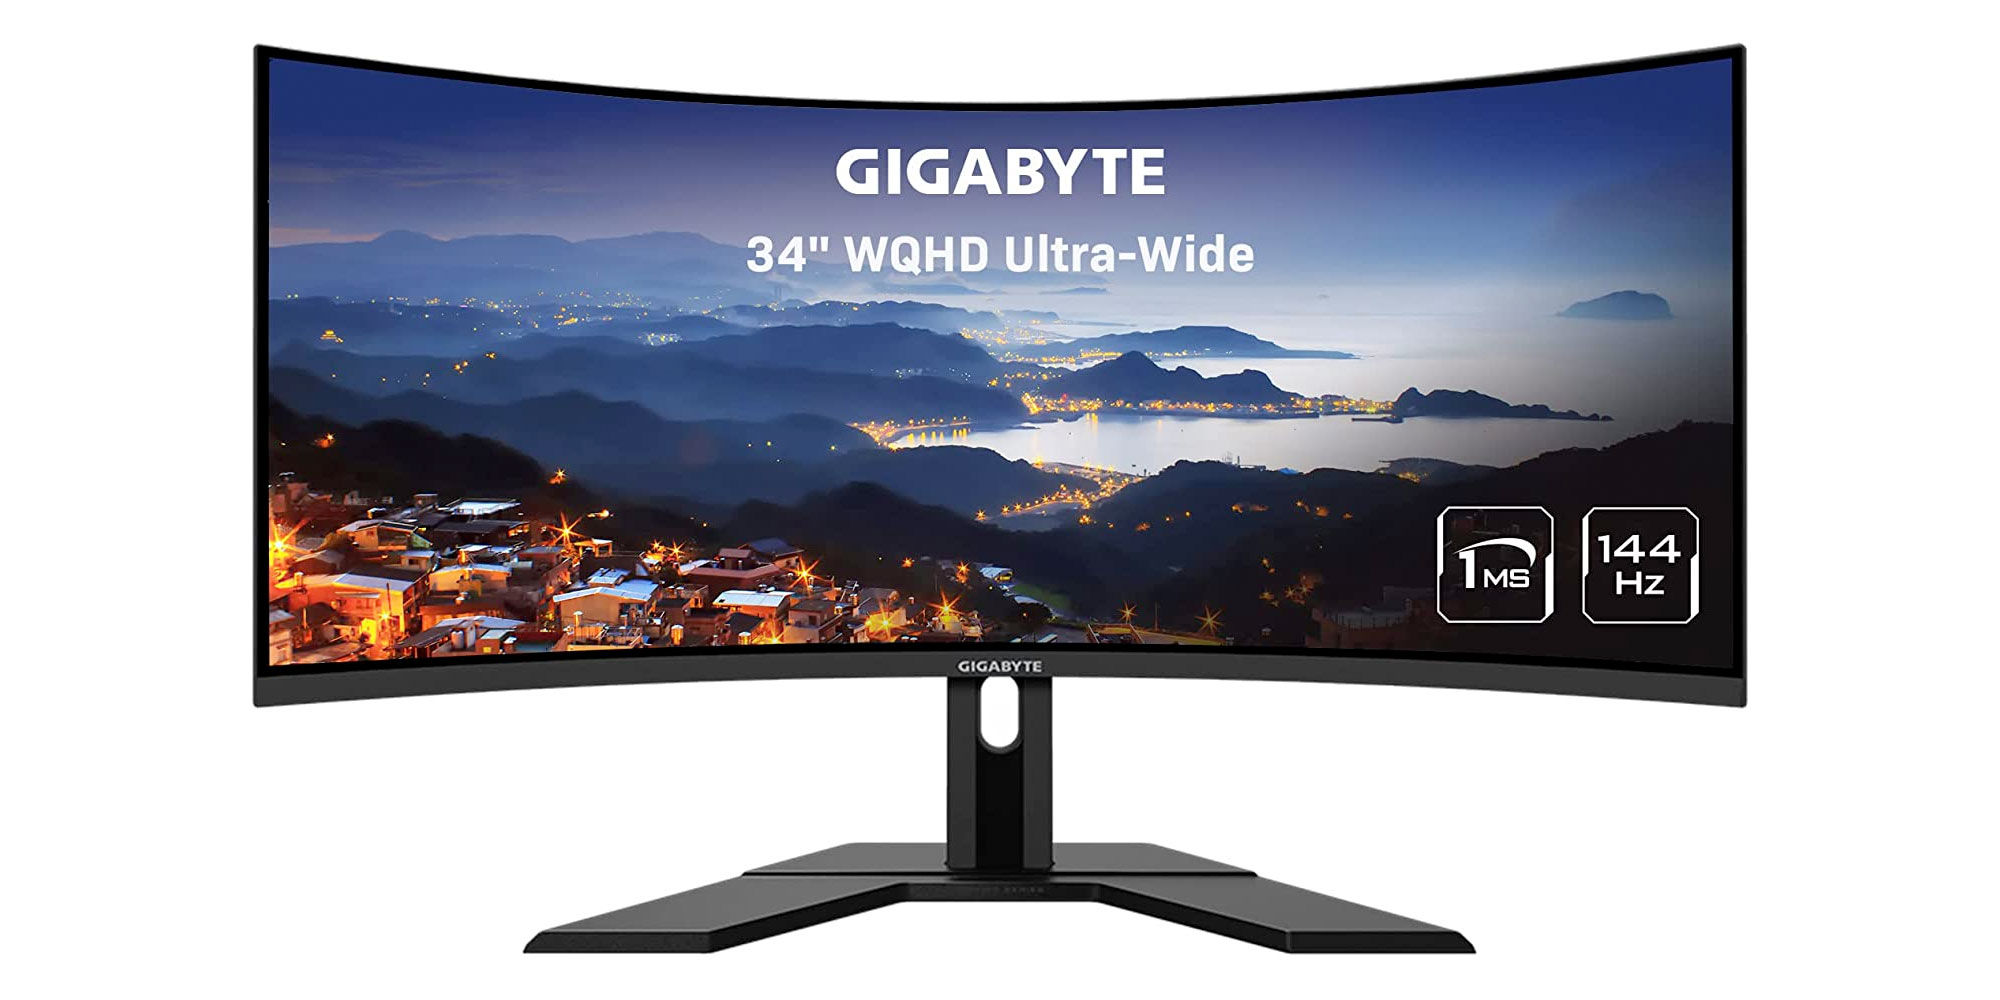 GIGABYTE's 34-inch 1440p 144Hz UltraWide gaming monitor plummets to new low  at $300